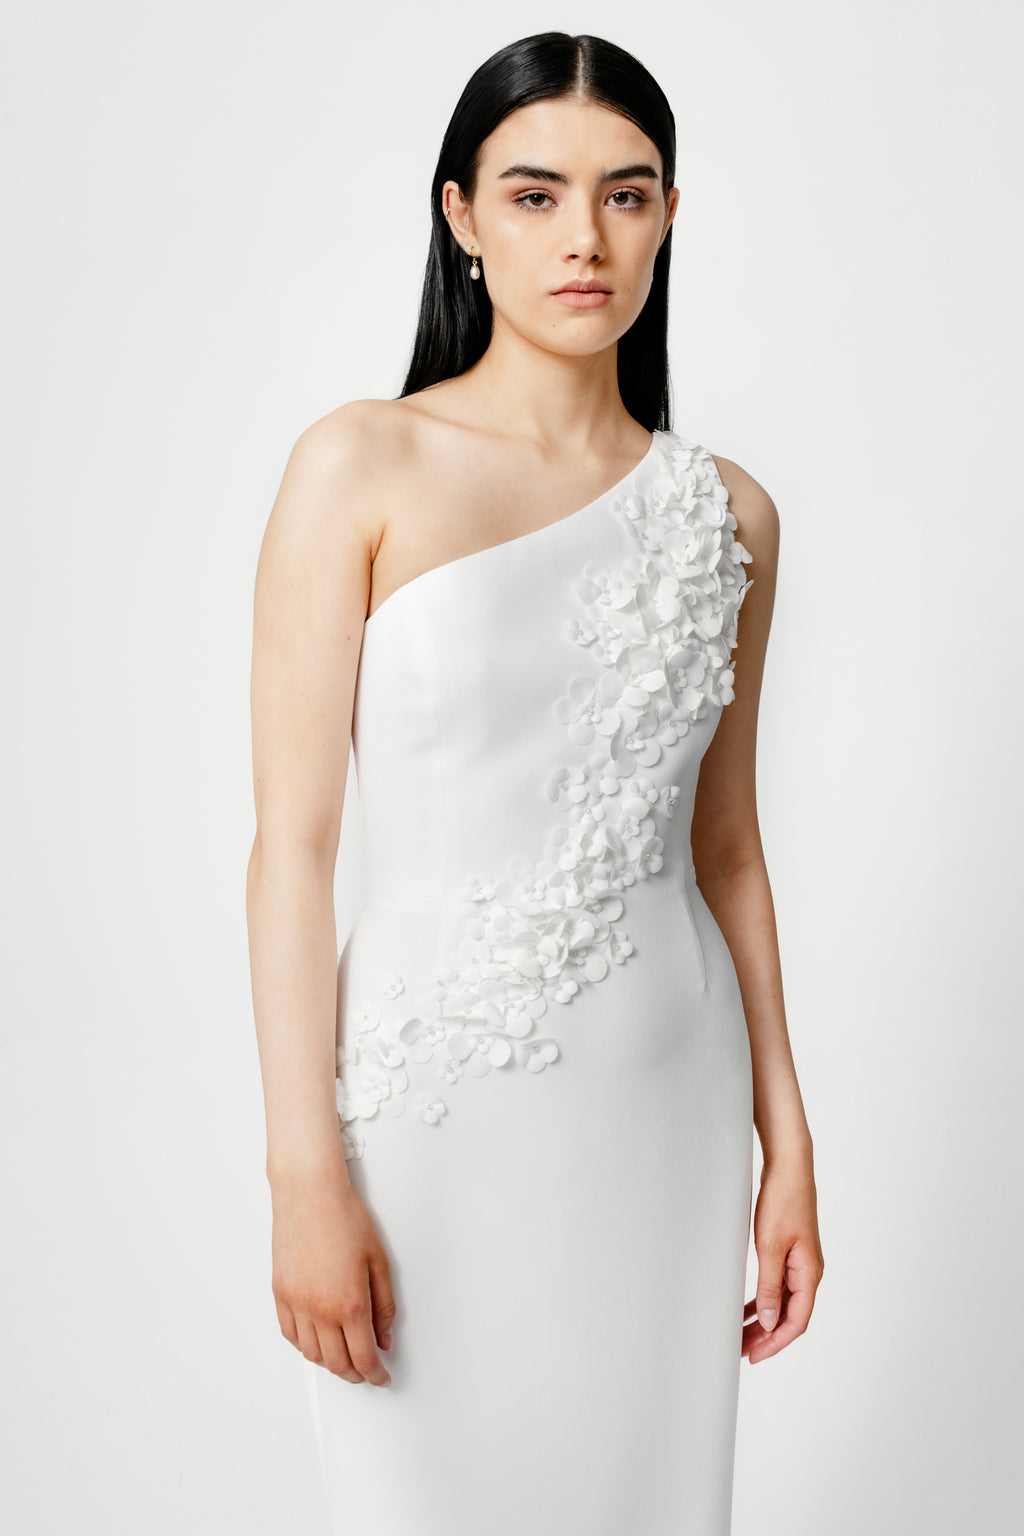 Plunge Front Gown with Boa Skirt – Catherine Regehr